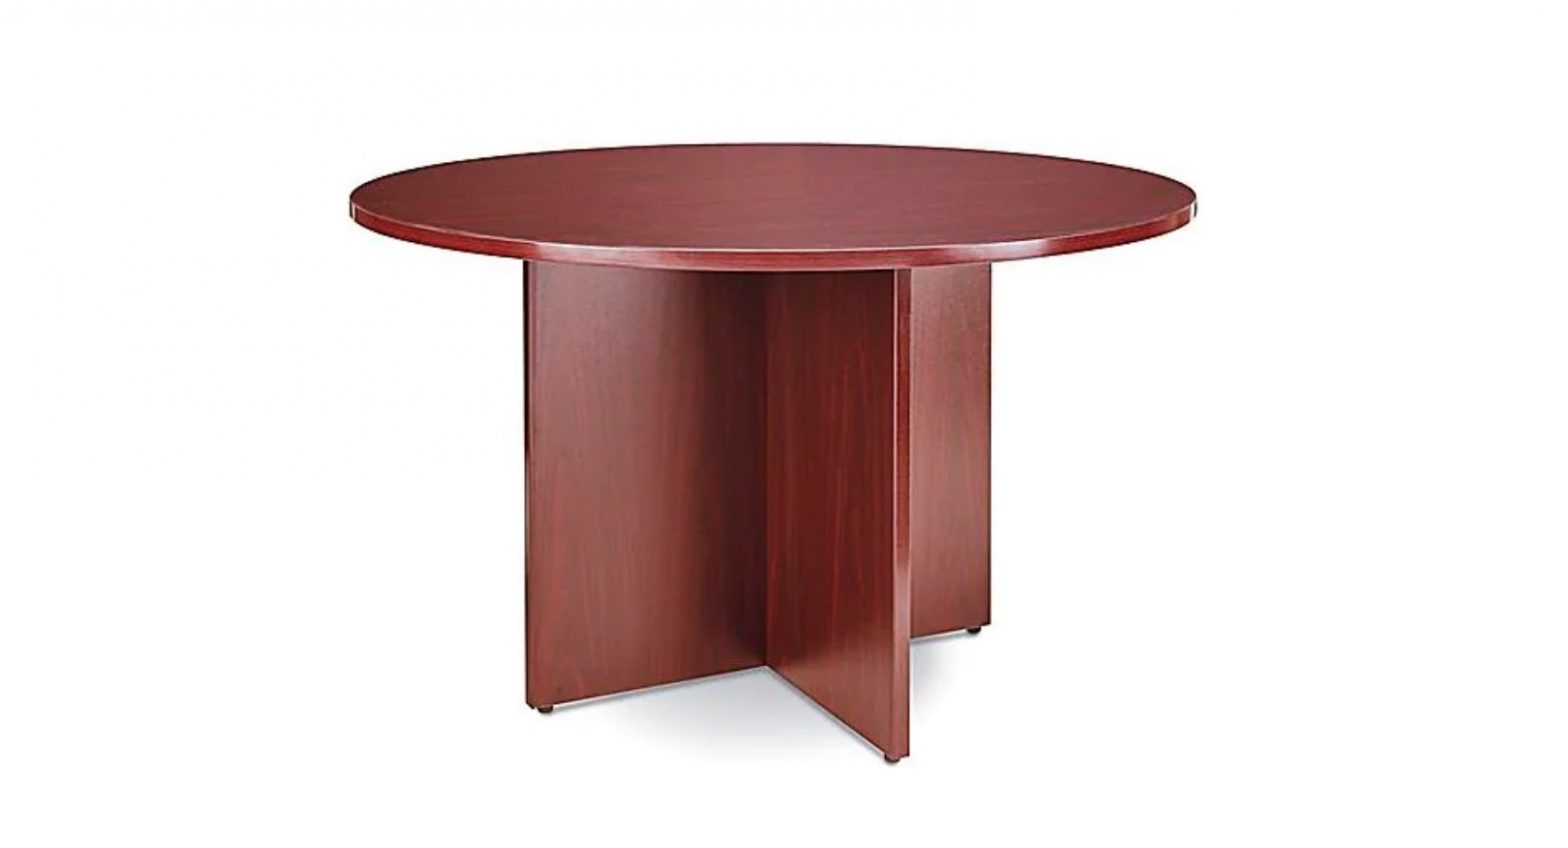 ULINE 48′ Round Conference Table Instructions